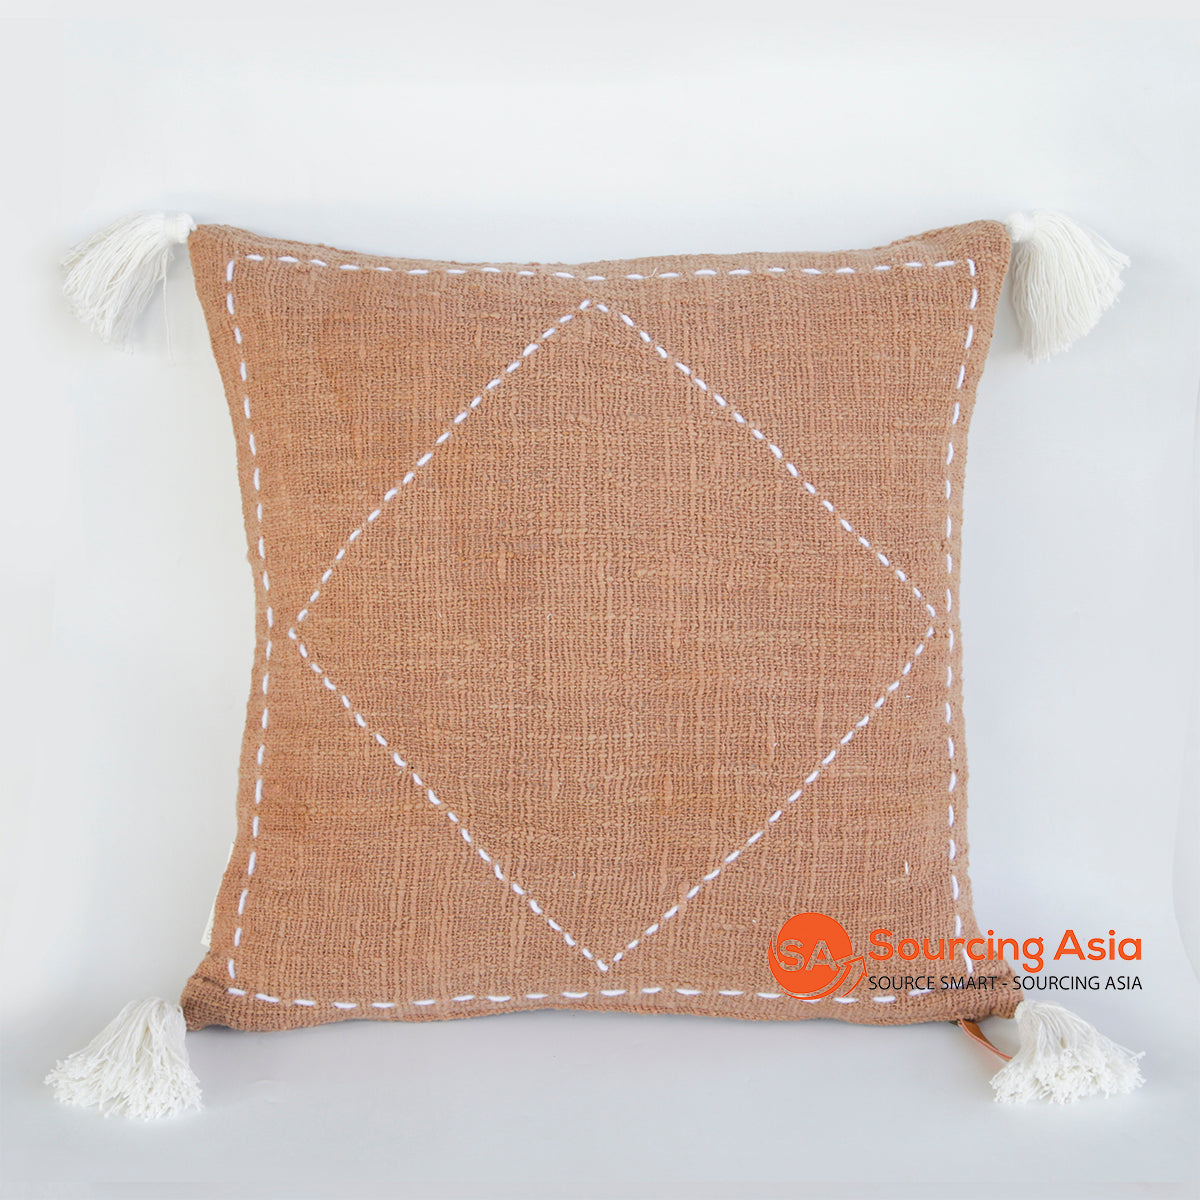 HIP033 TOBACCO TUMANGGAL FABRIC SQUARE COVER CUSHION WITH WHITE LINE HAND-STITCHED AND TASSELS (PRICE WITHOUT INNER)